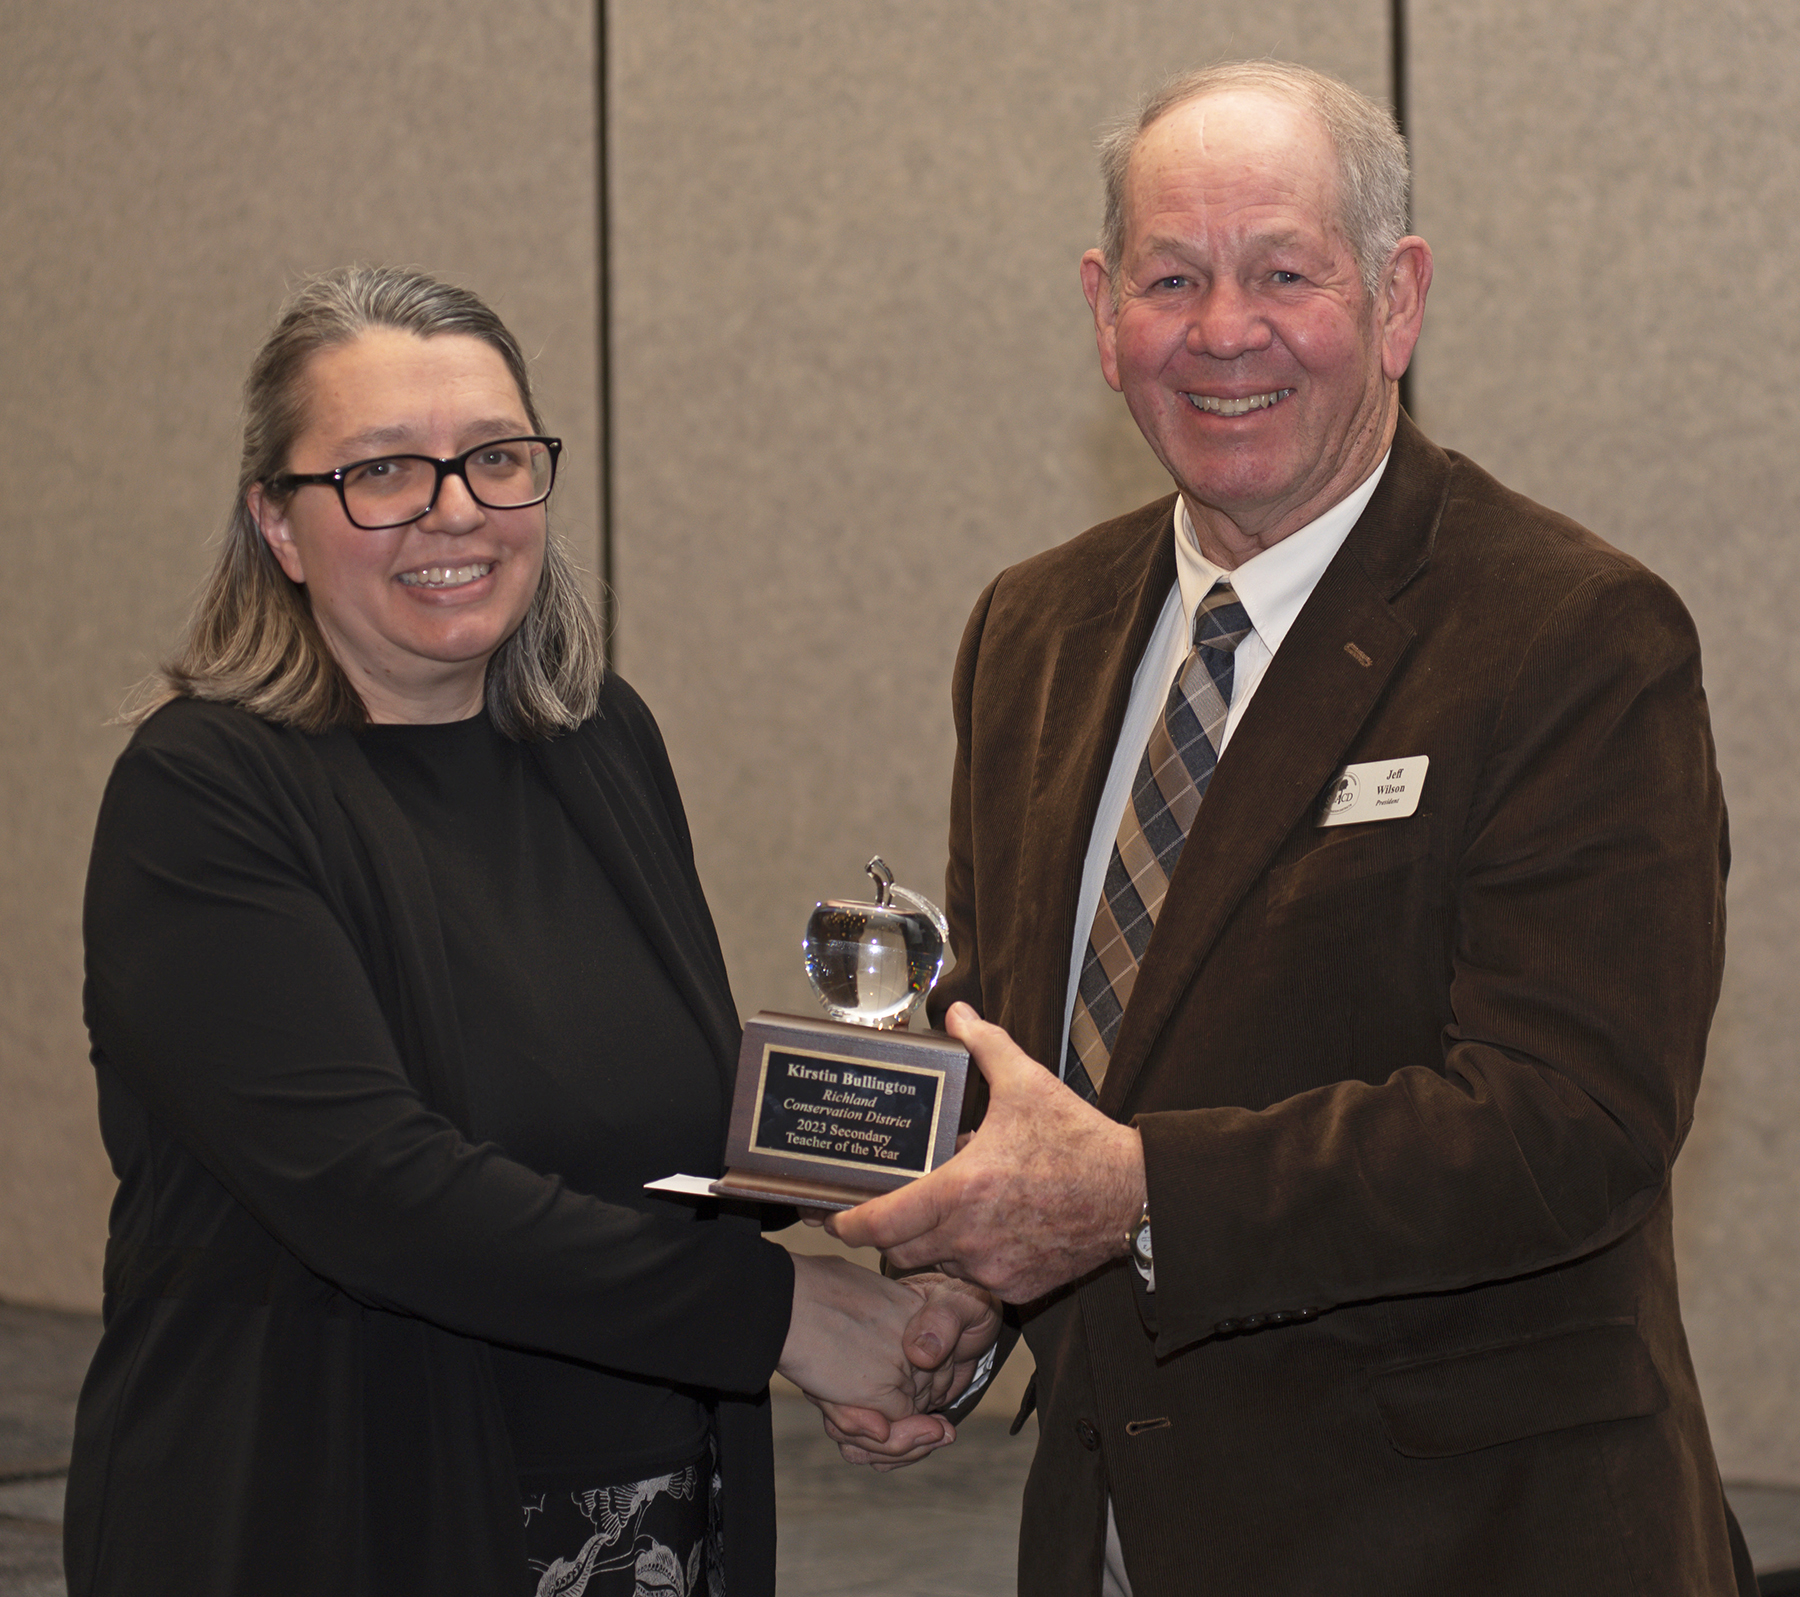 Kirstin Bullington, an instructor at Richland Two Institute of Innovation, receives the 2023 Conservation Teacher of the Year award (Secondary) from Jeff Wilson, president of the S.C. Association of Conservation Districts